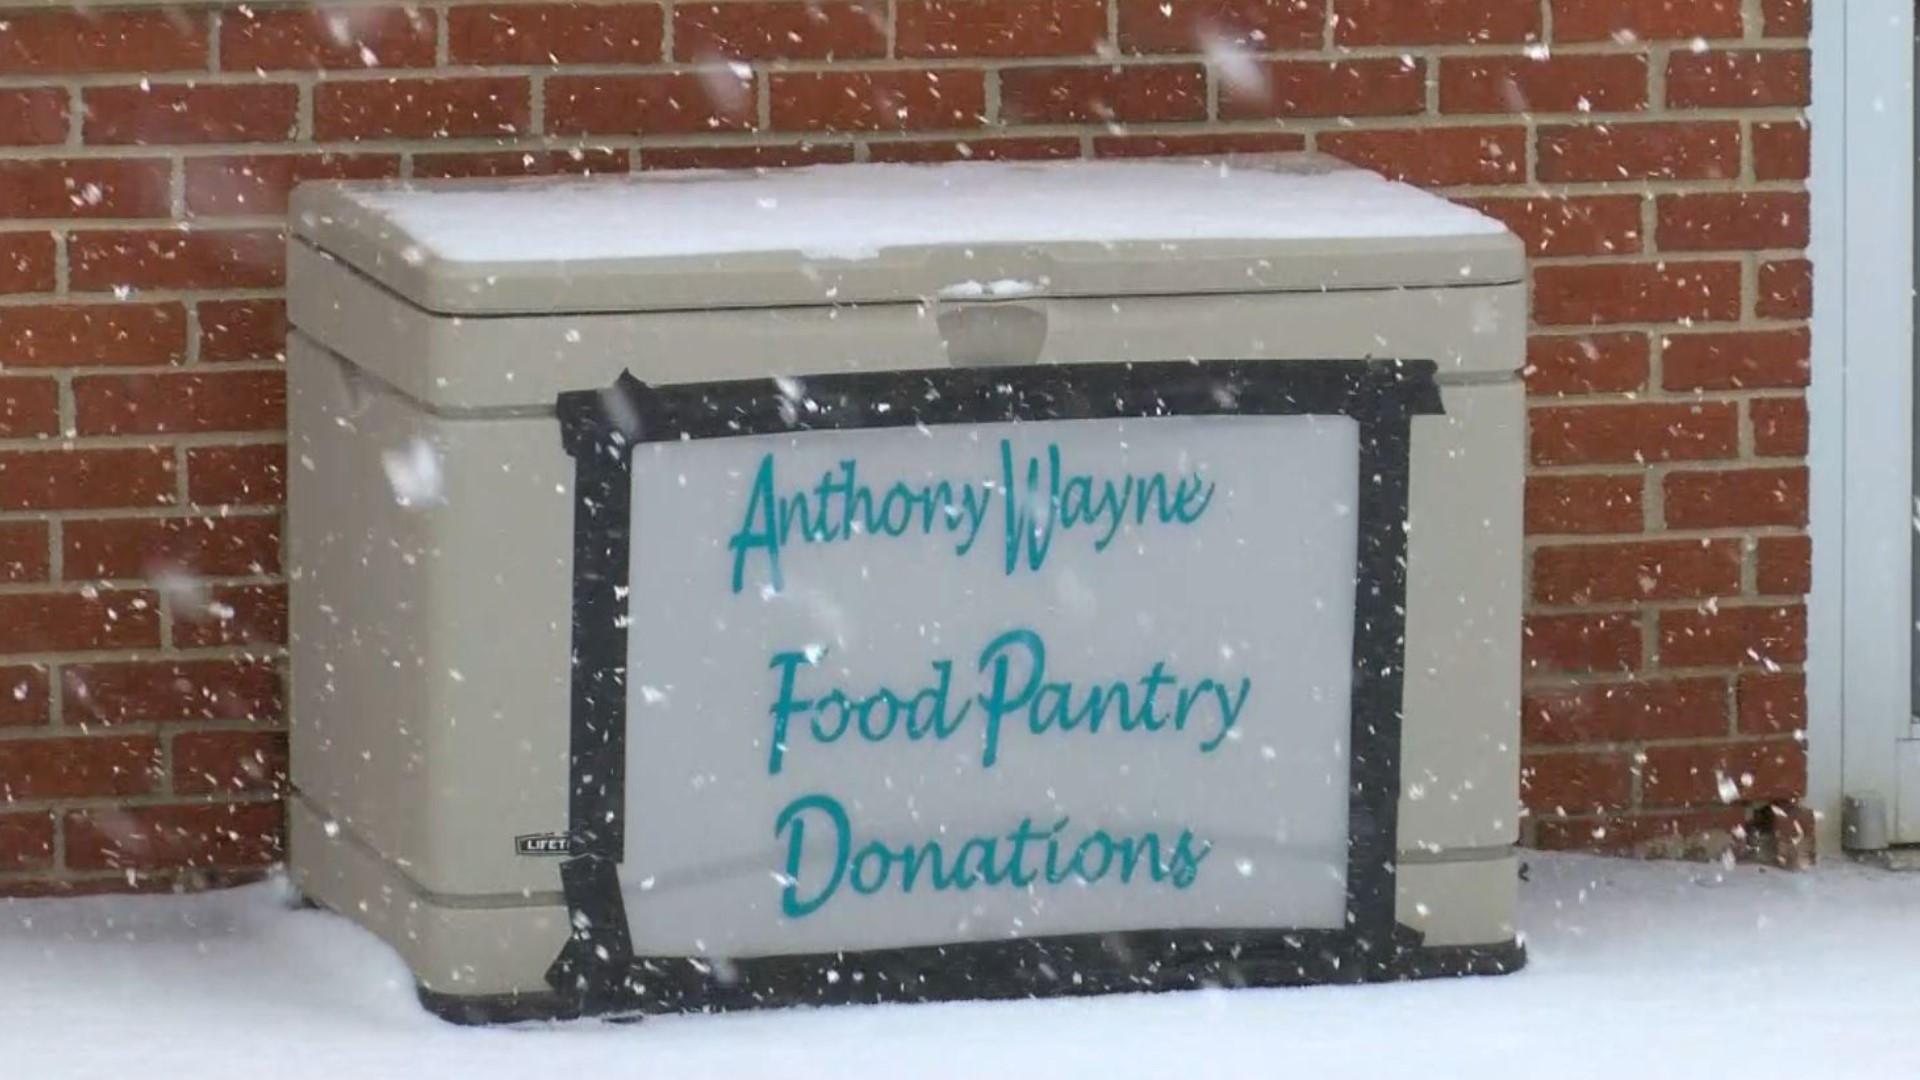 The Anthony Wayne Food Pantry run by the Zion United Methodist Church saw plenty of generosity this week leading up to the holiday.